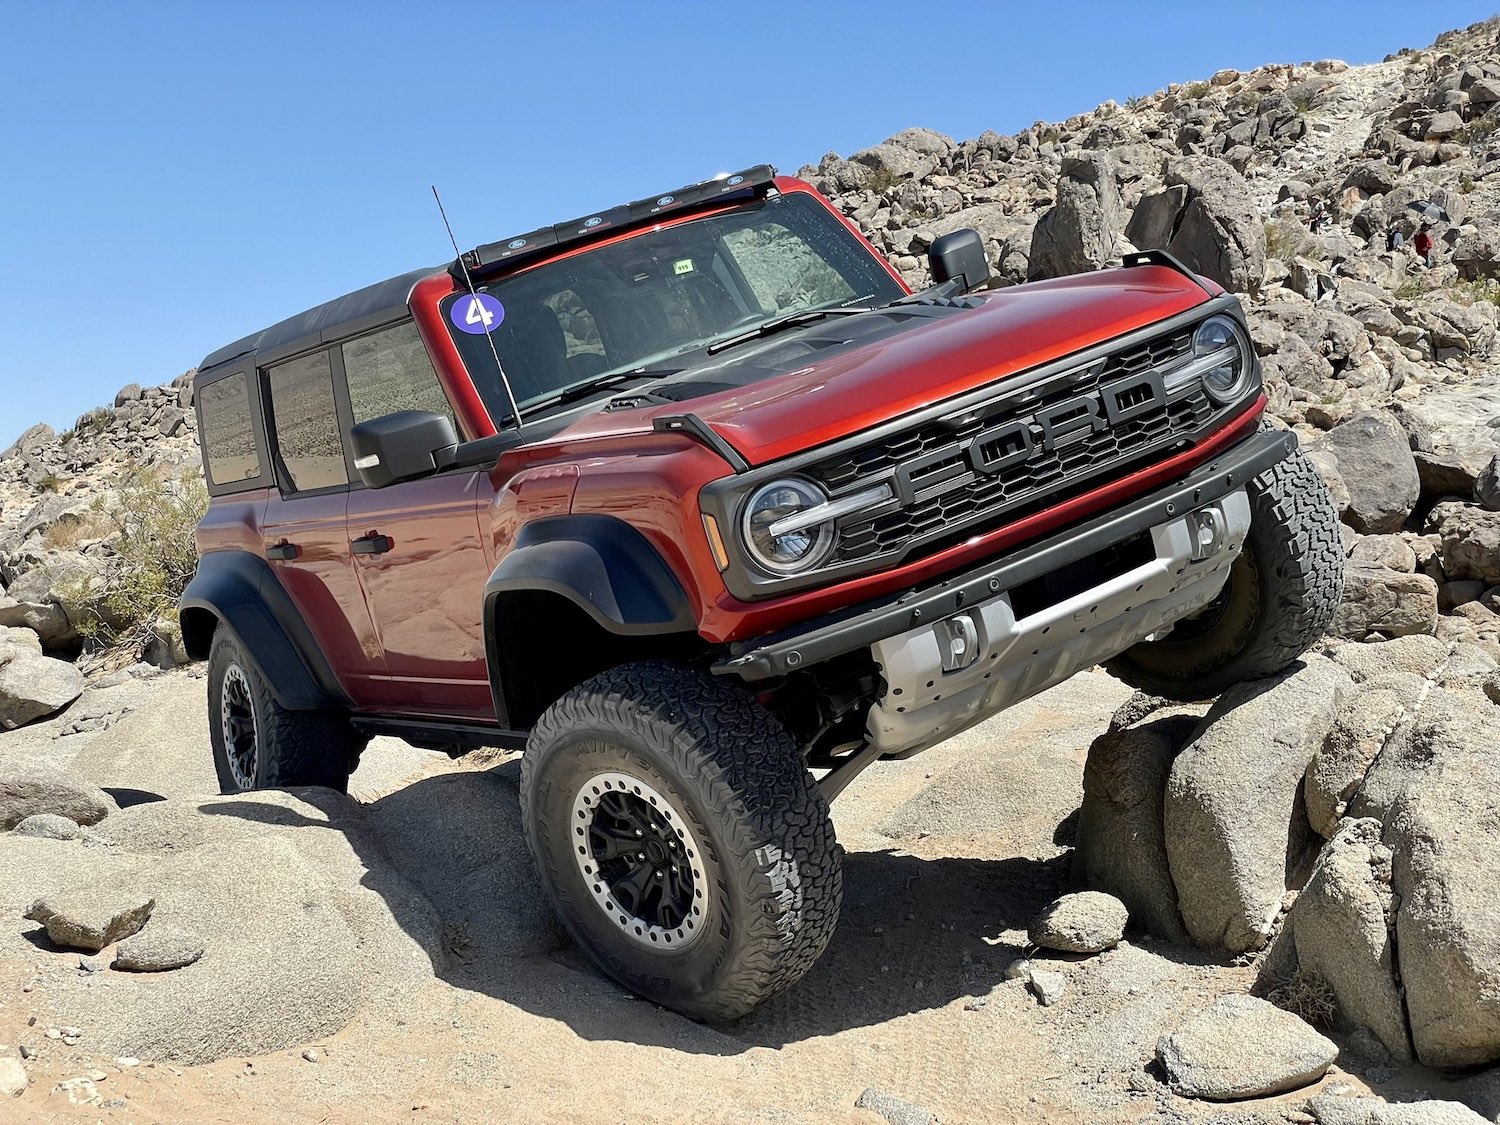 Ford Bronco Raptor Beats Jeep Wrangler 392 In New Comparison Test